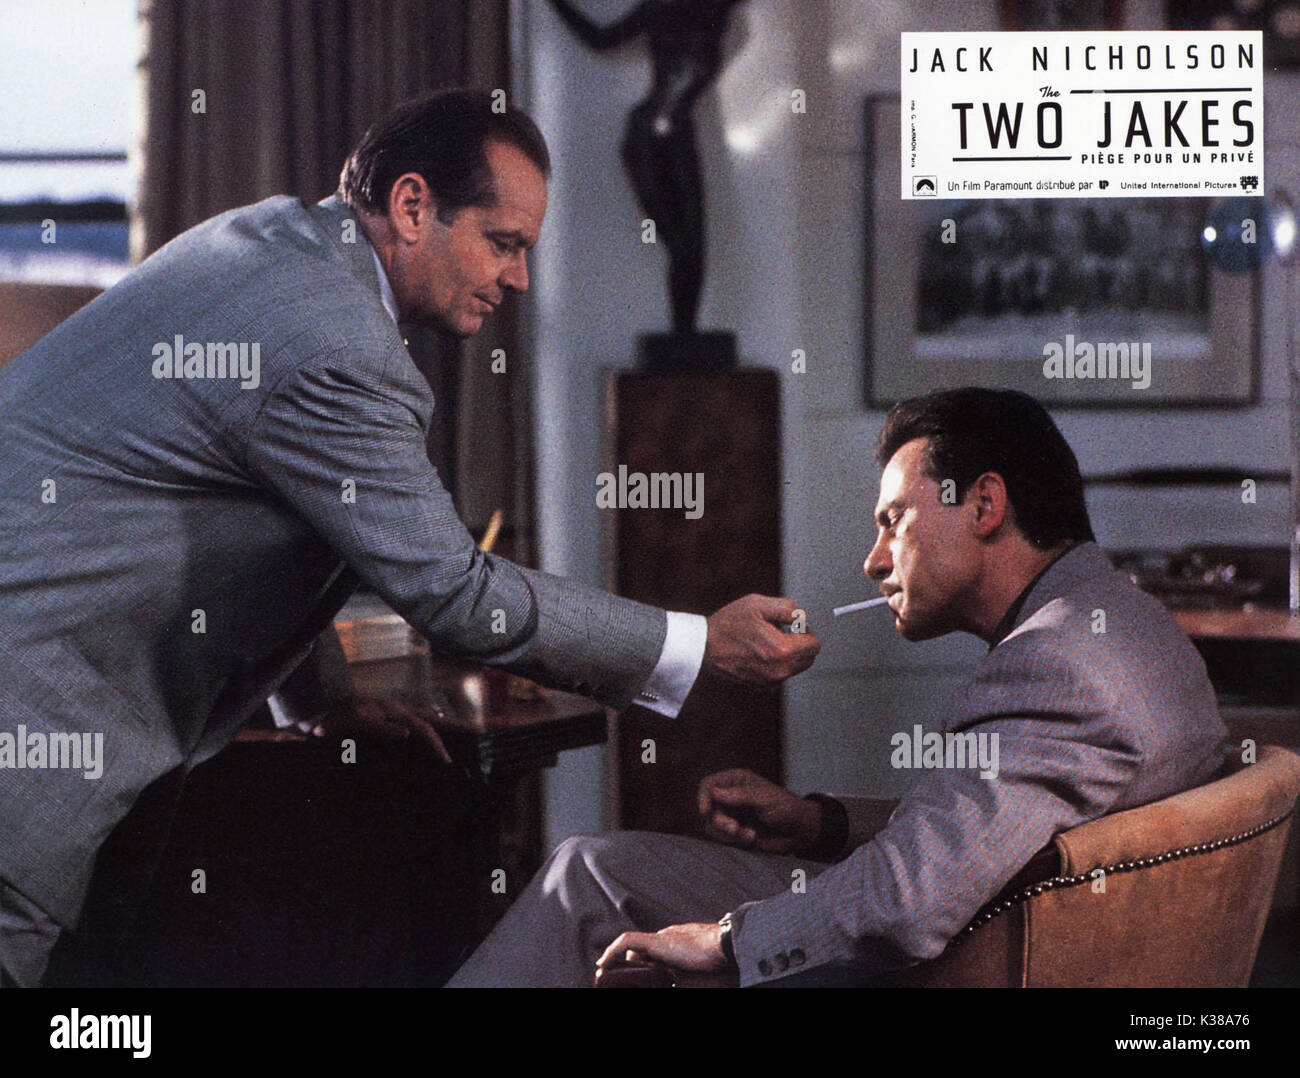 THE TWO JAKES JACK NICHOLSON AND HARVEY KEITEL A PARAMOUNT PICTURE     Date: 1990 Stock Photo